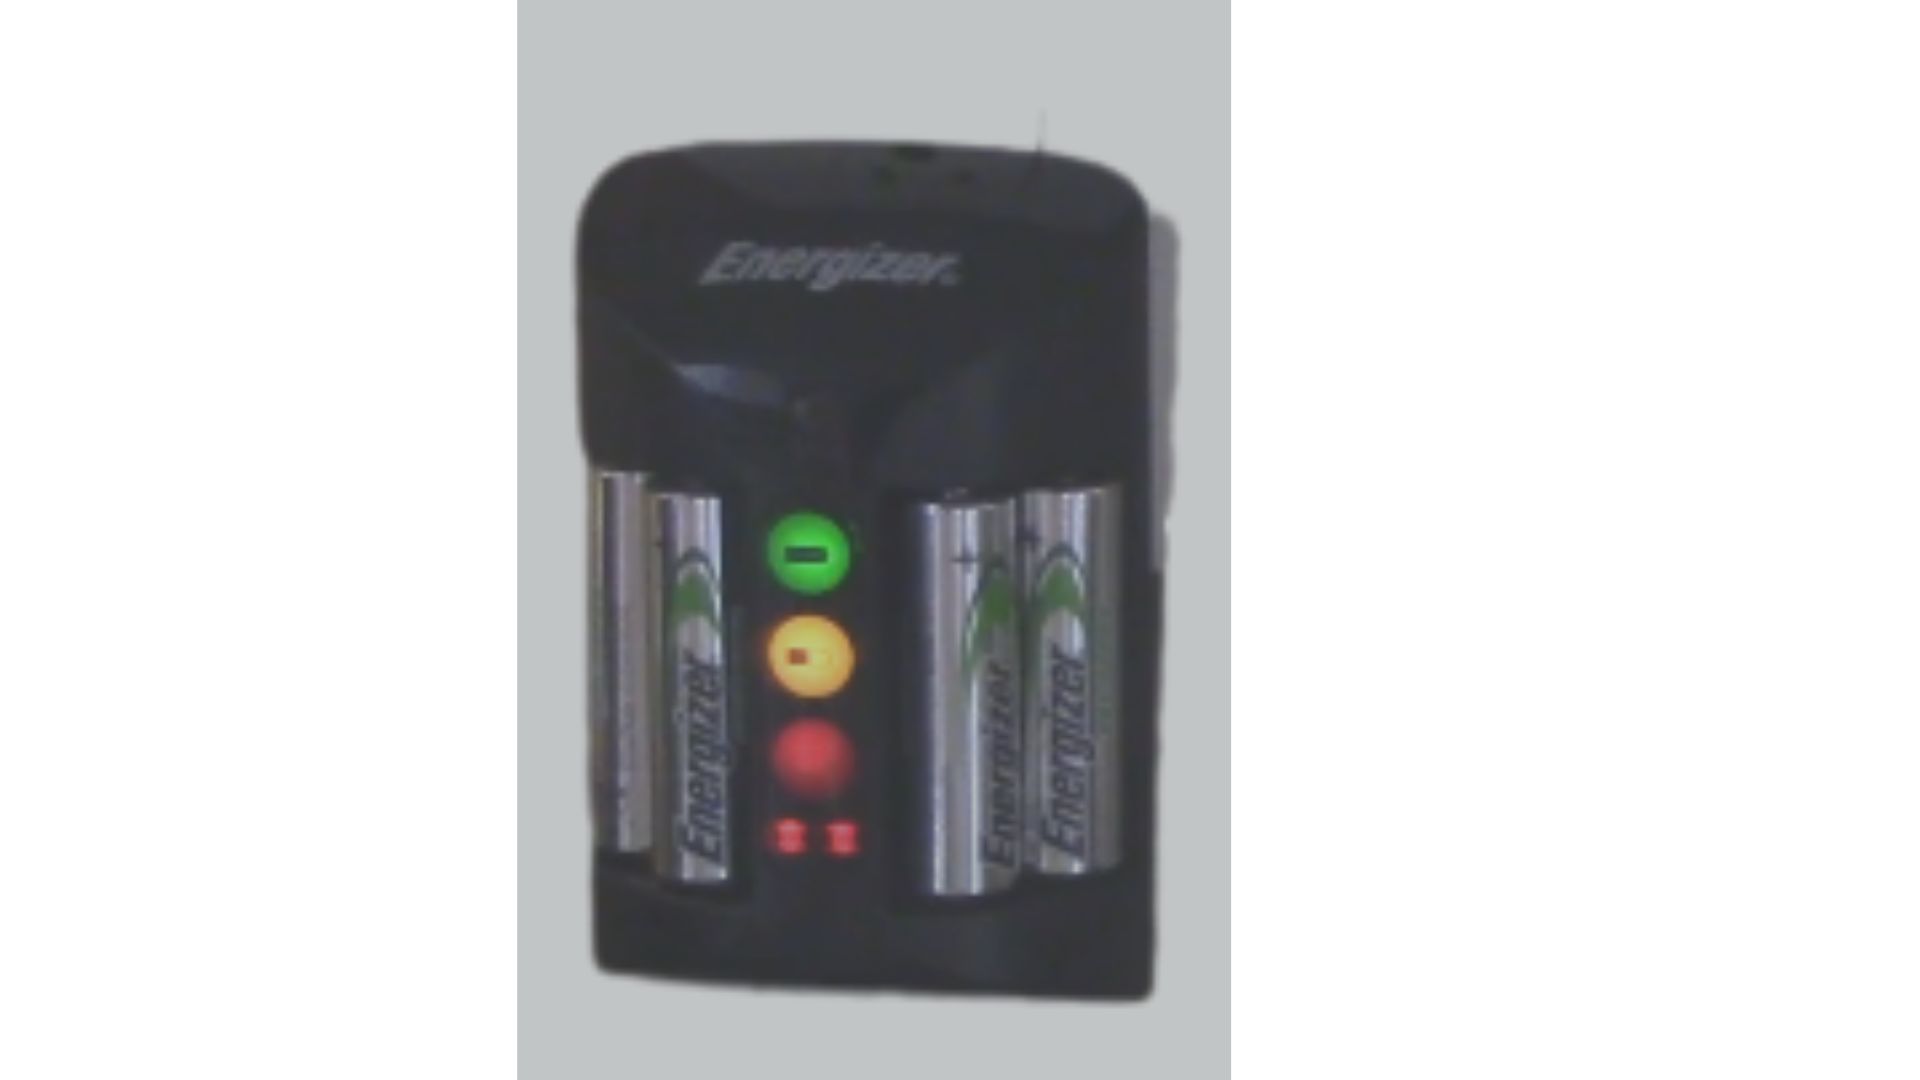 energizer battery charger flashing red, blue, yellow and green light